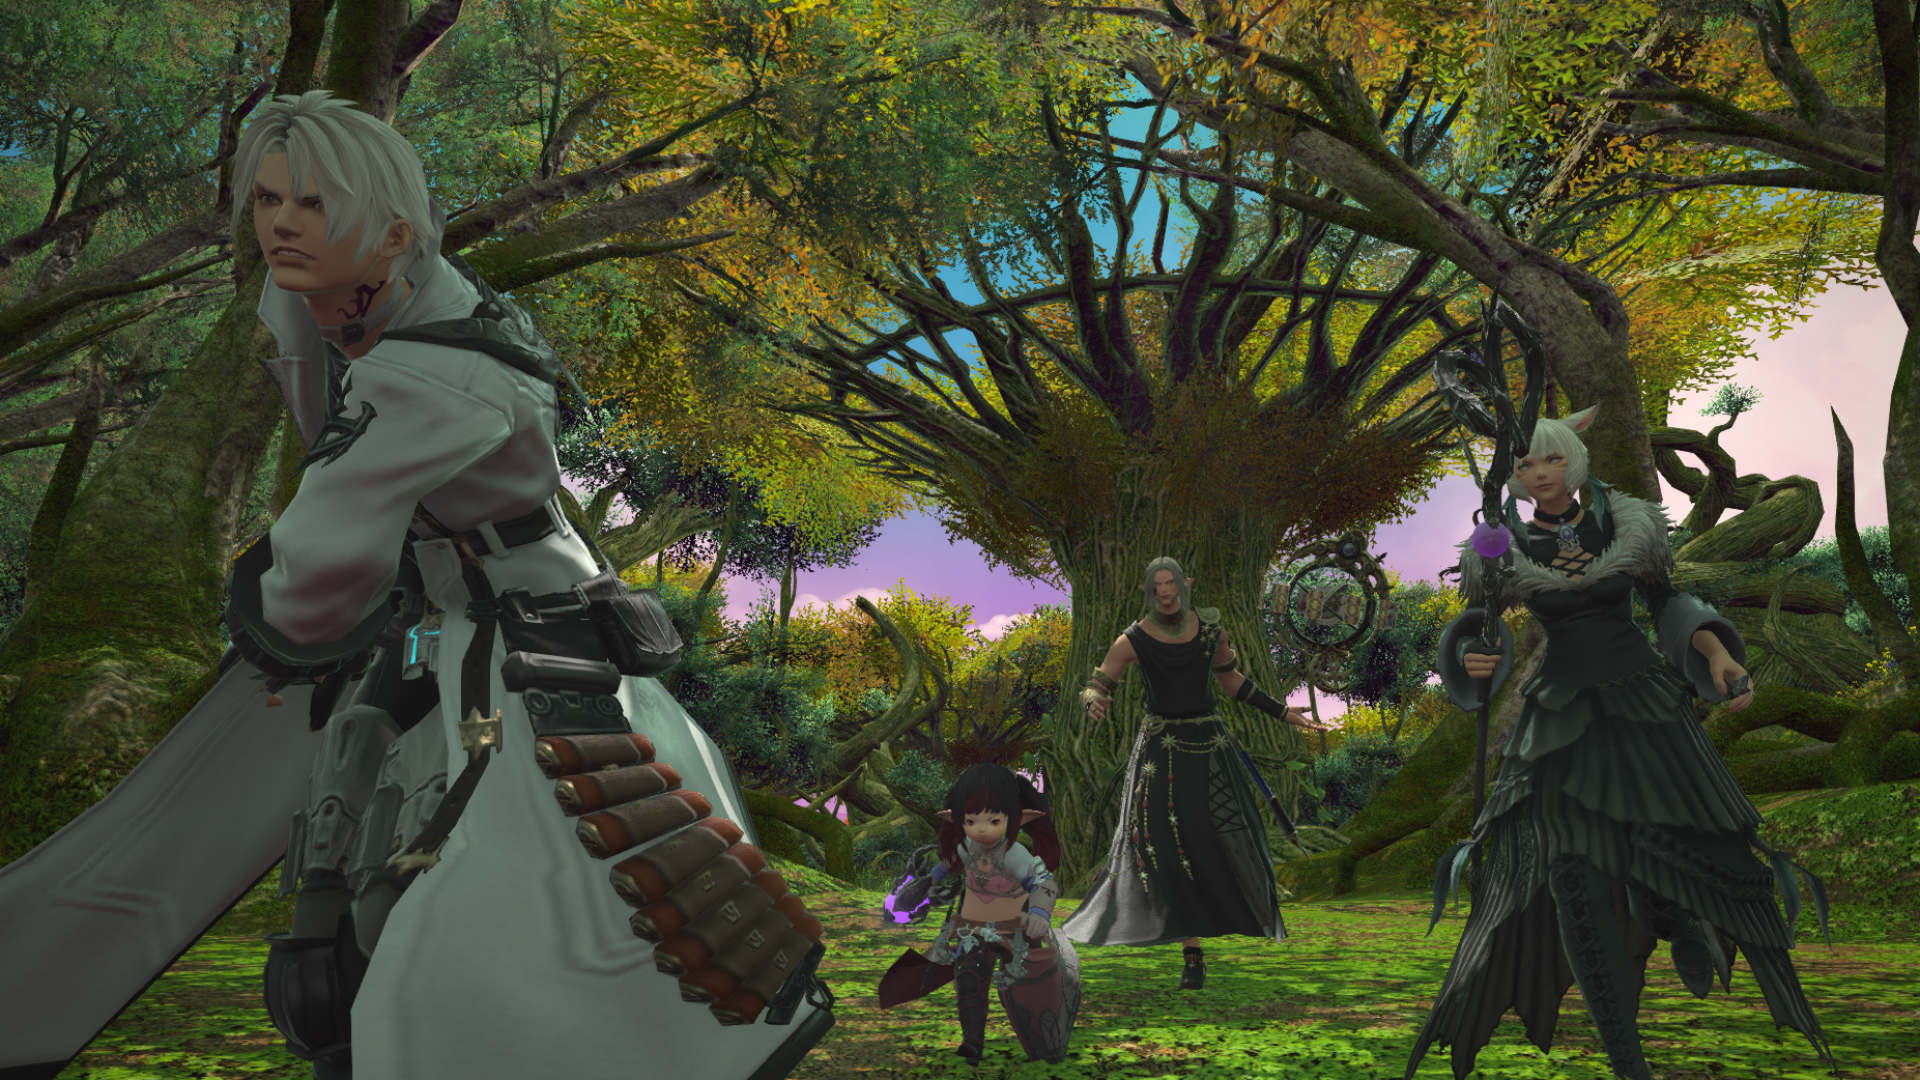 Ffxiv Leveling Guide The Quickest Way To Level Up In Final Fantasy 14 Pcgamesn